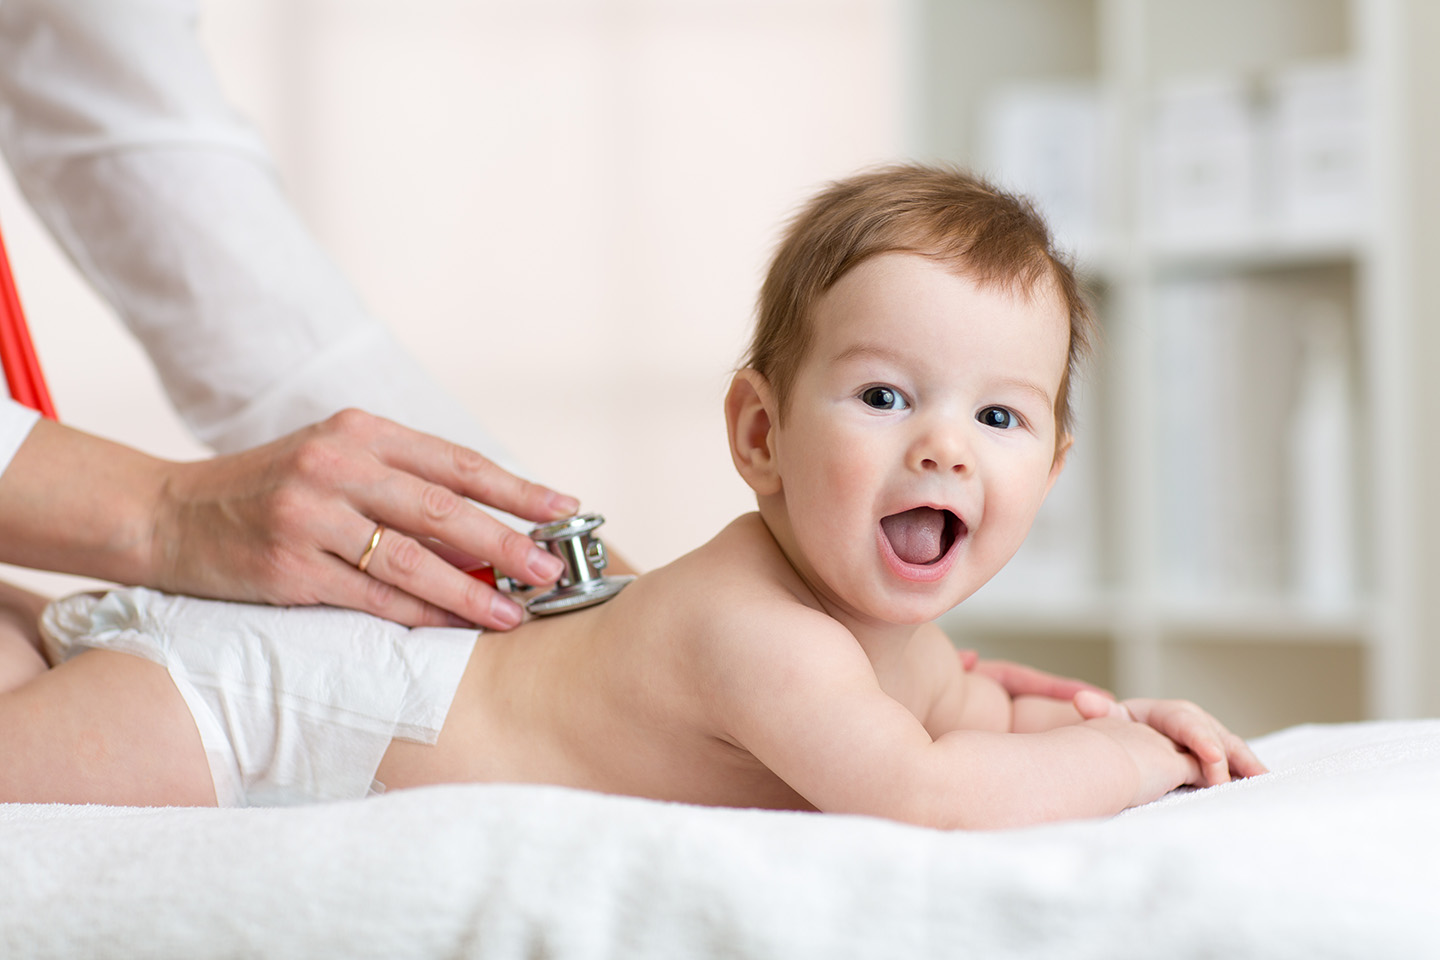 Infant getting examined by a doctor